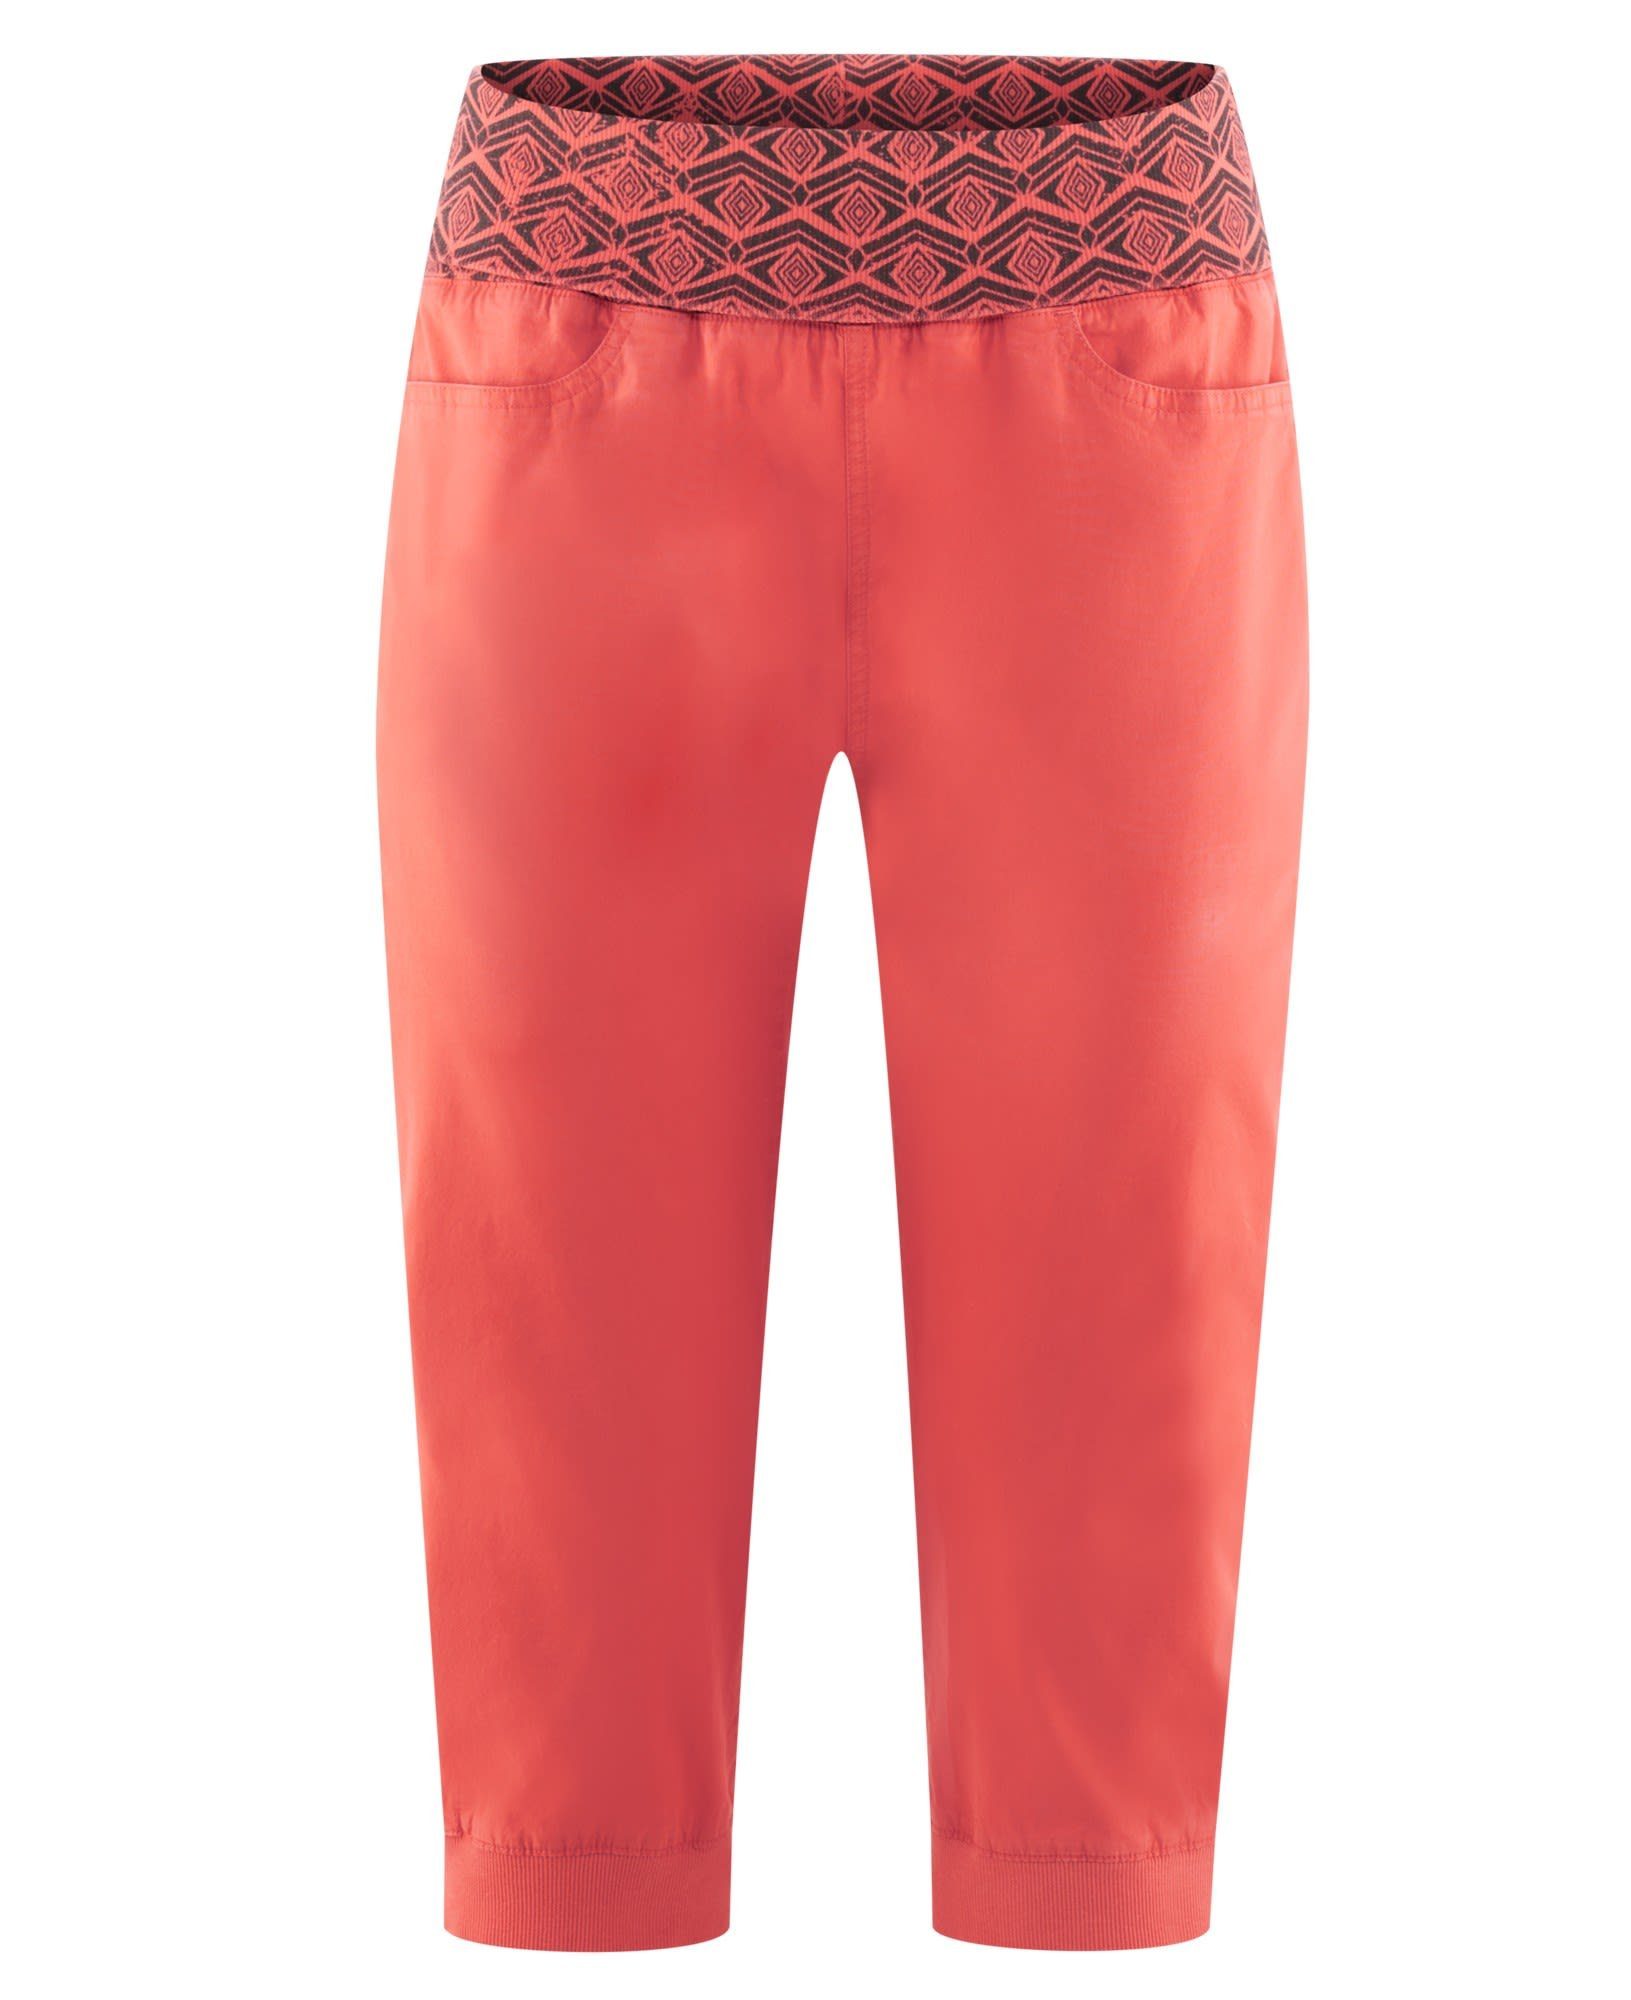 Pants Chili Chili W Ii Damen Hose Gela Red Clay Outdoorhose 3/4 Red